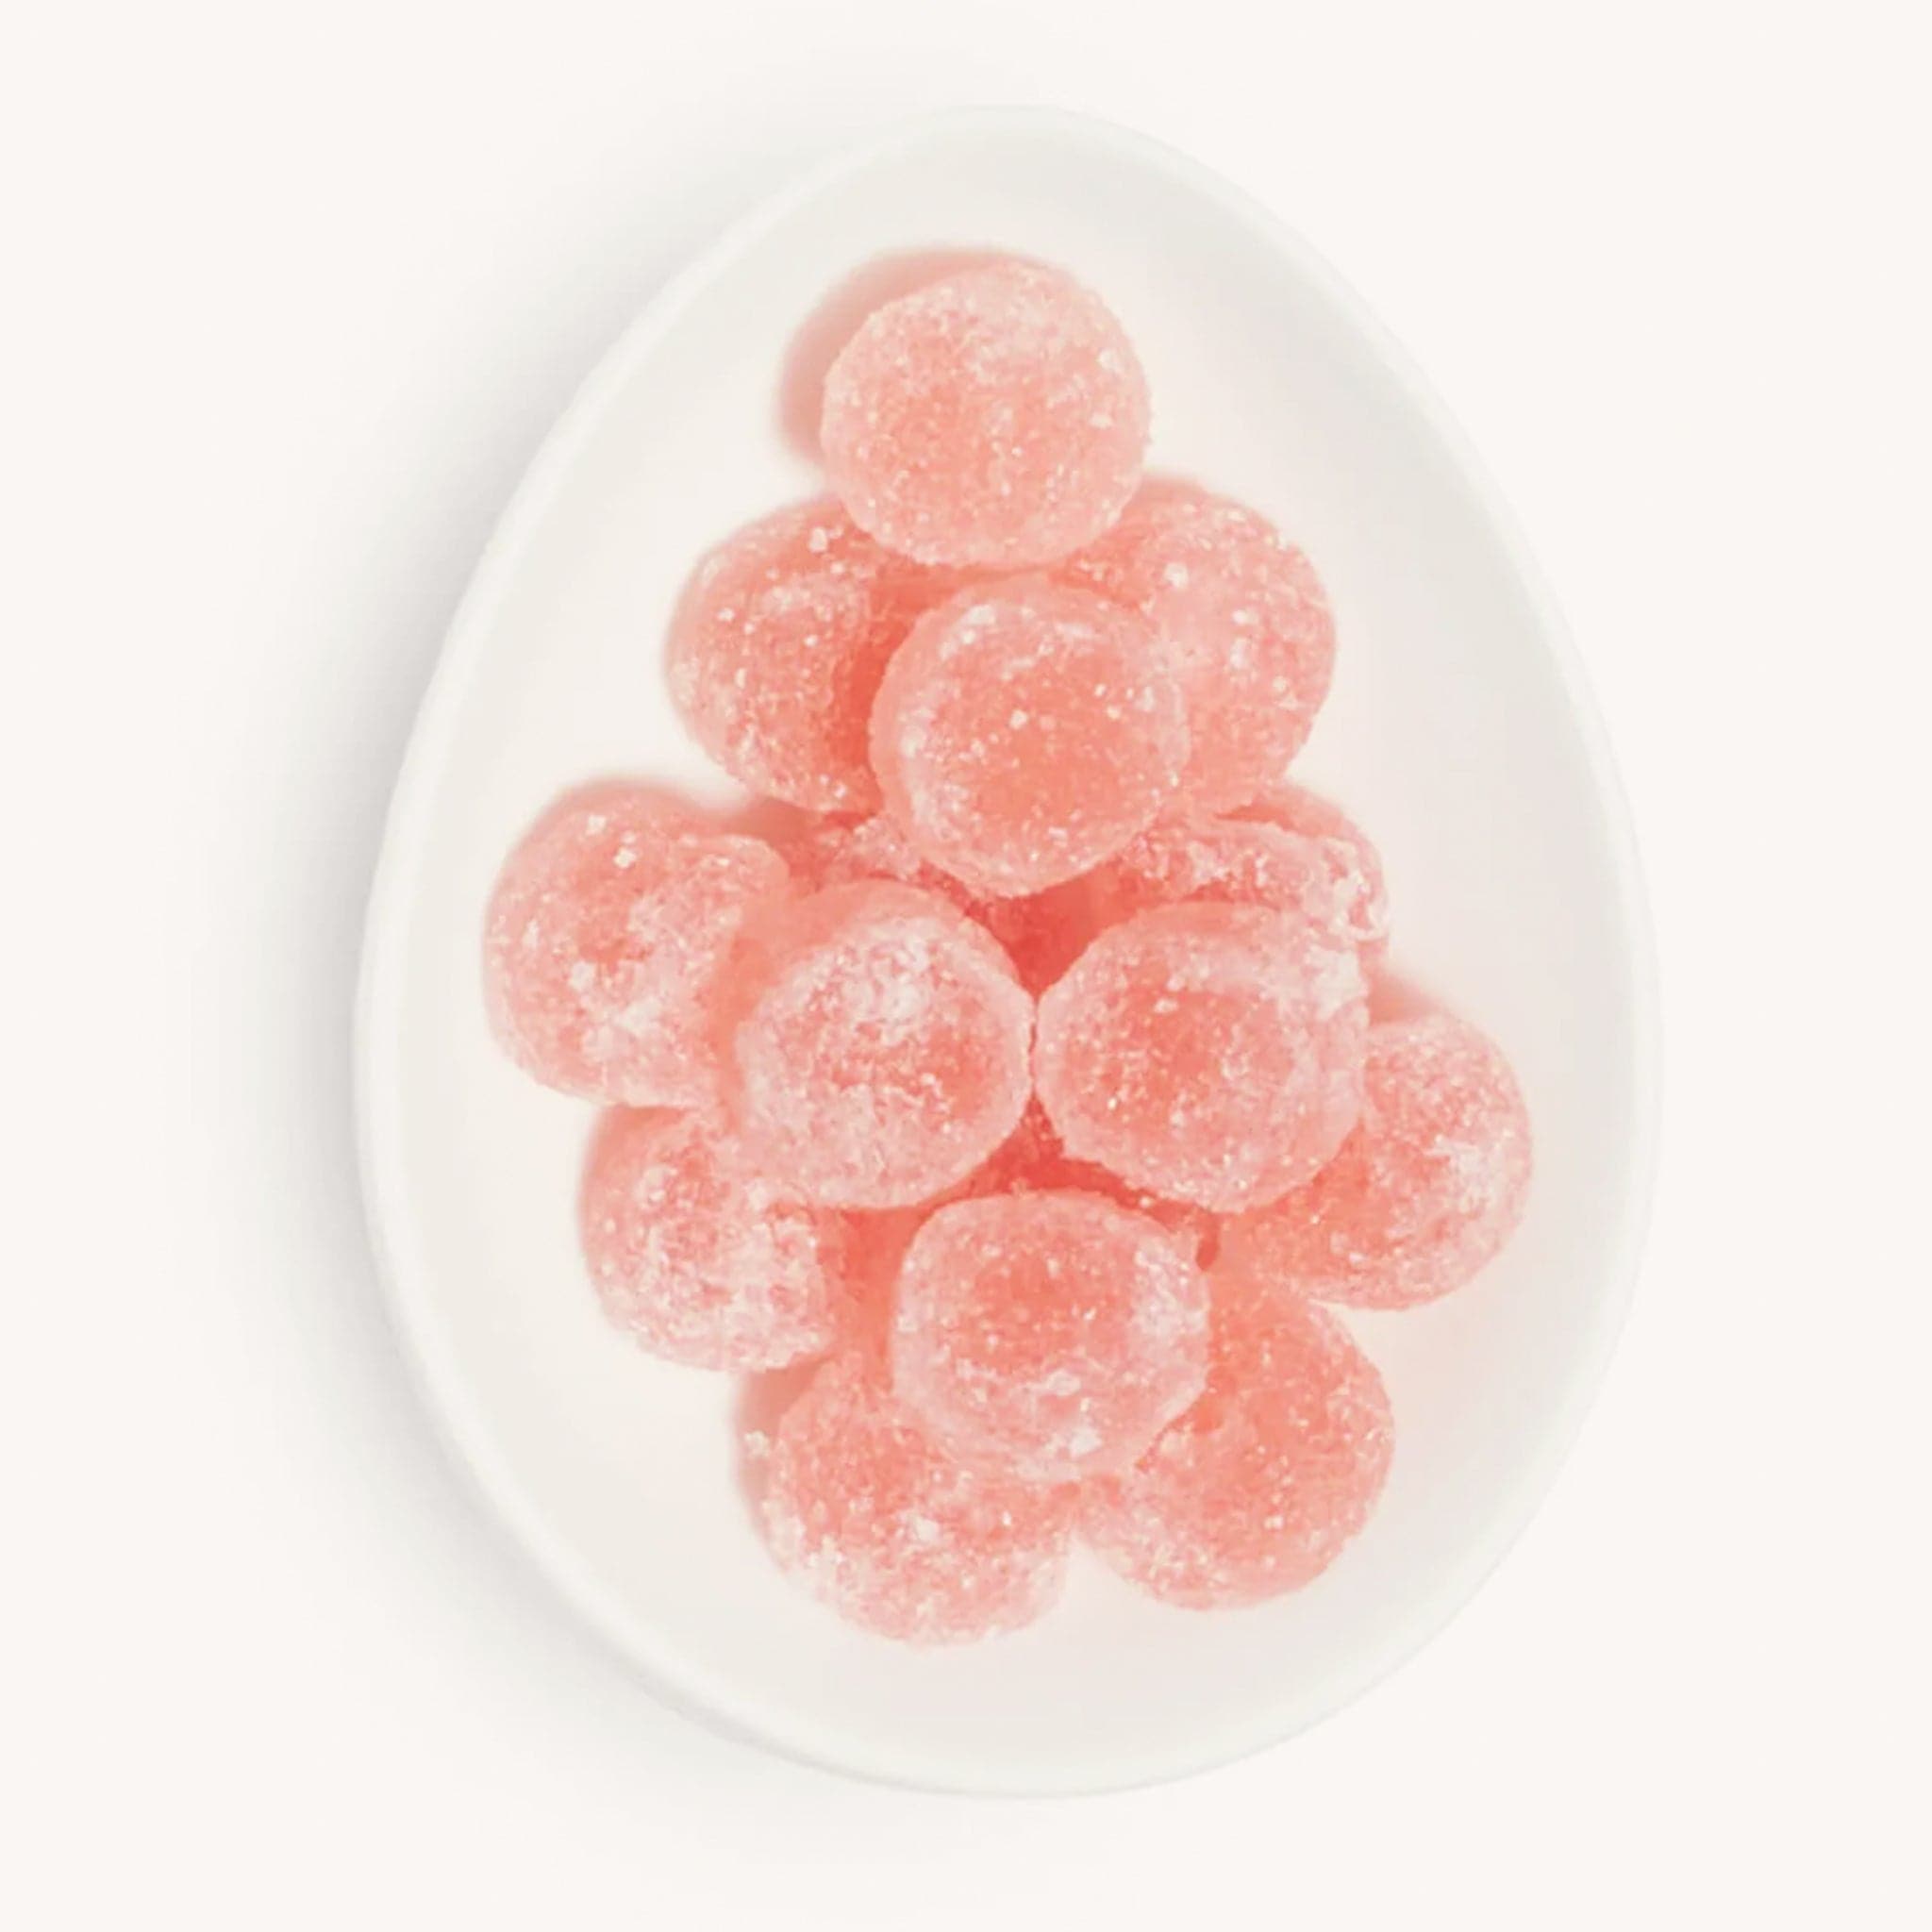 On a white background is a white egg shaped dish with round light pink candies dusted with white sugar. 